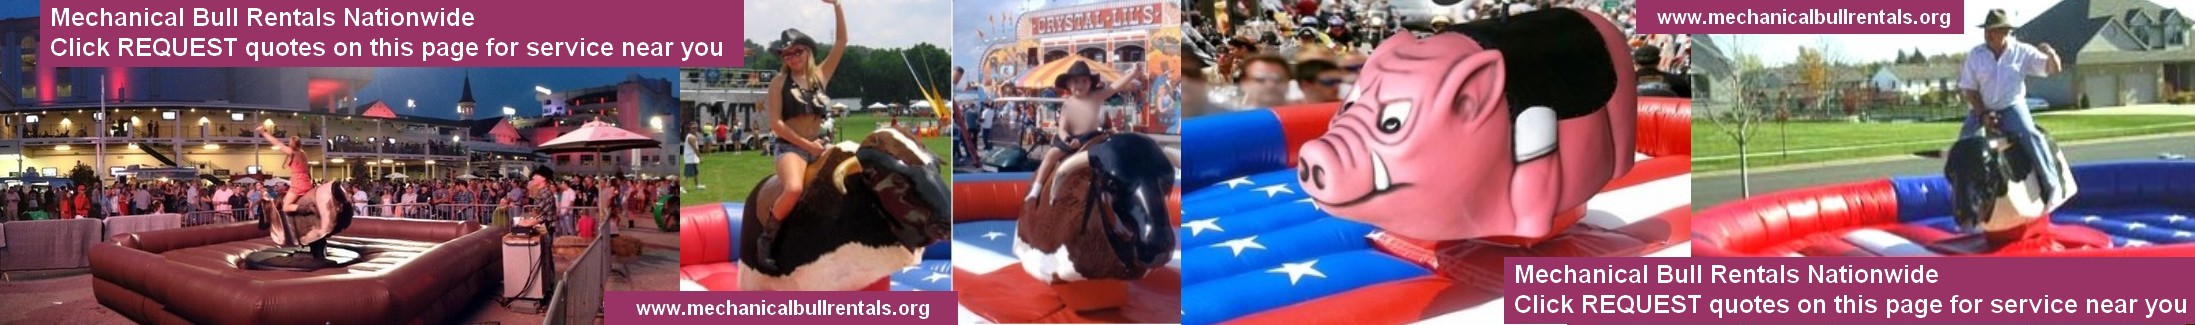 Mechanical Bull Rentals Peoria Illinois IL and near you. Free referrals to local mechanical bull companies LOGO